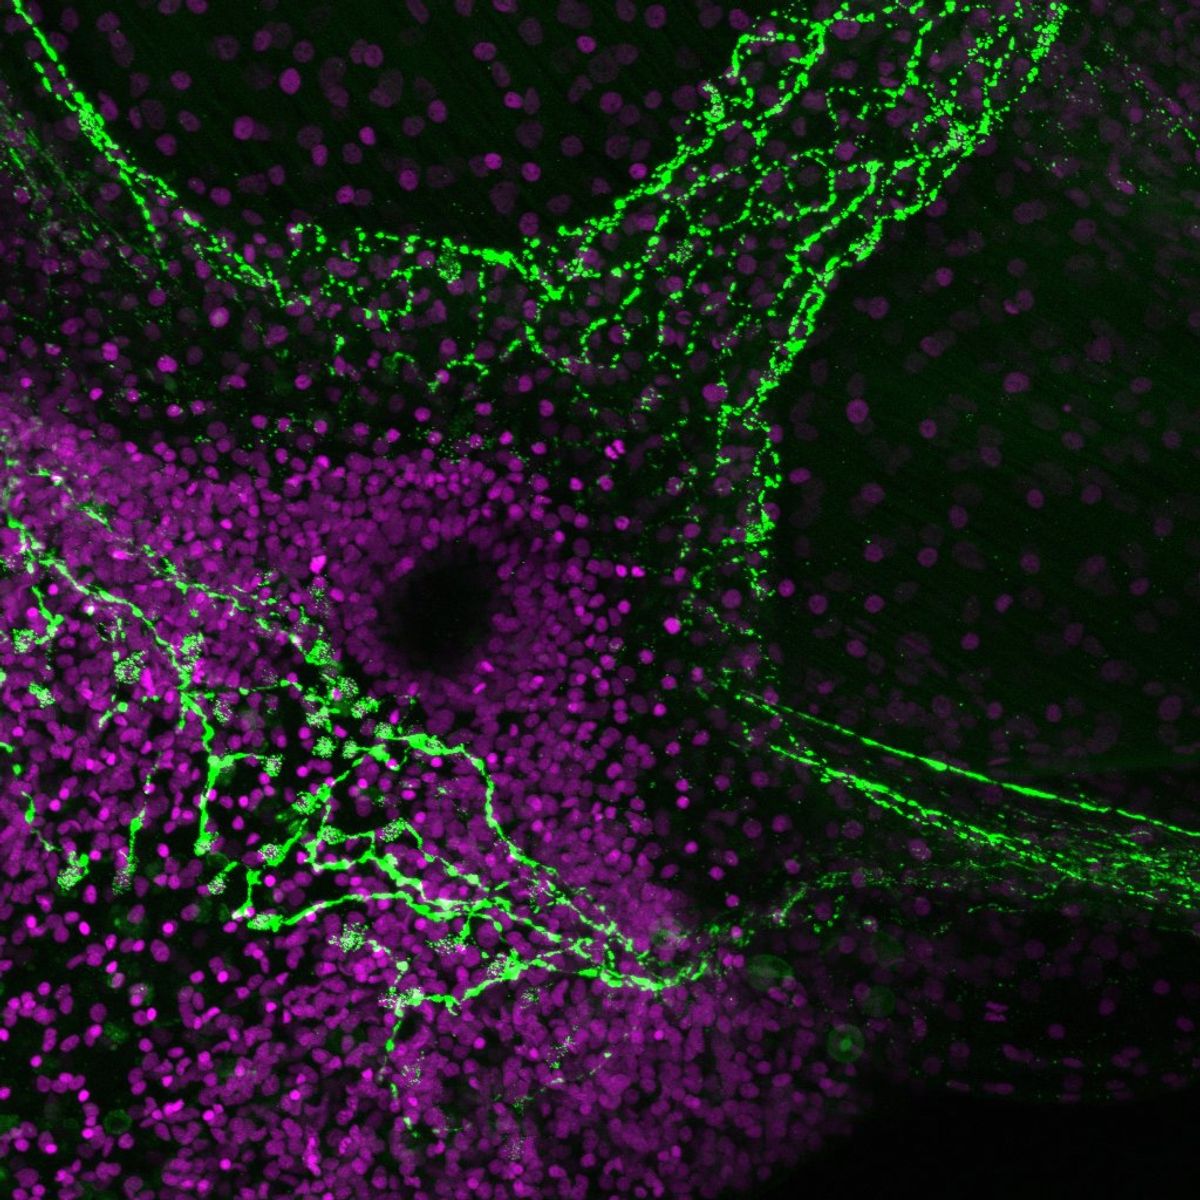 The image shows the base of a jellyfish’s tentacle and the animal’s eyelet. The neurons expressing the peptide of interest are shown in green, and the cell nuclei are labeled in magenta. The jellyfish is against a black background. 